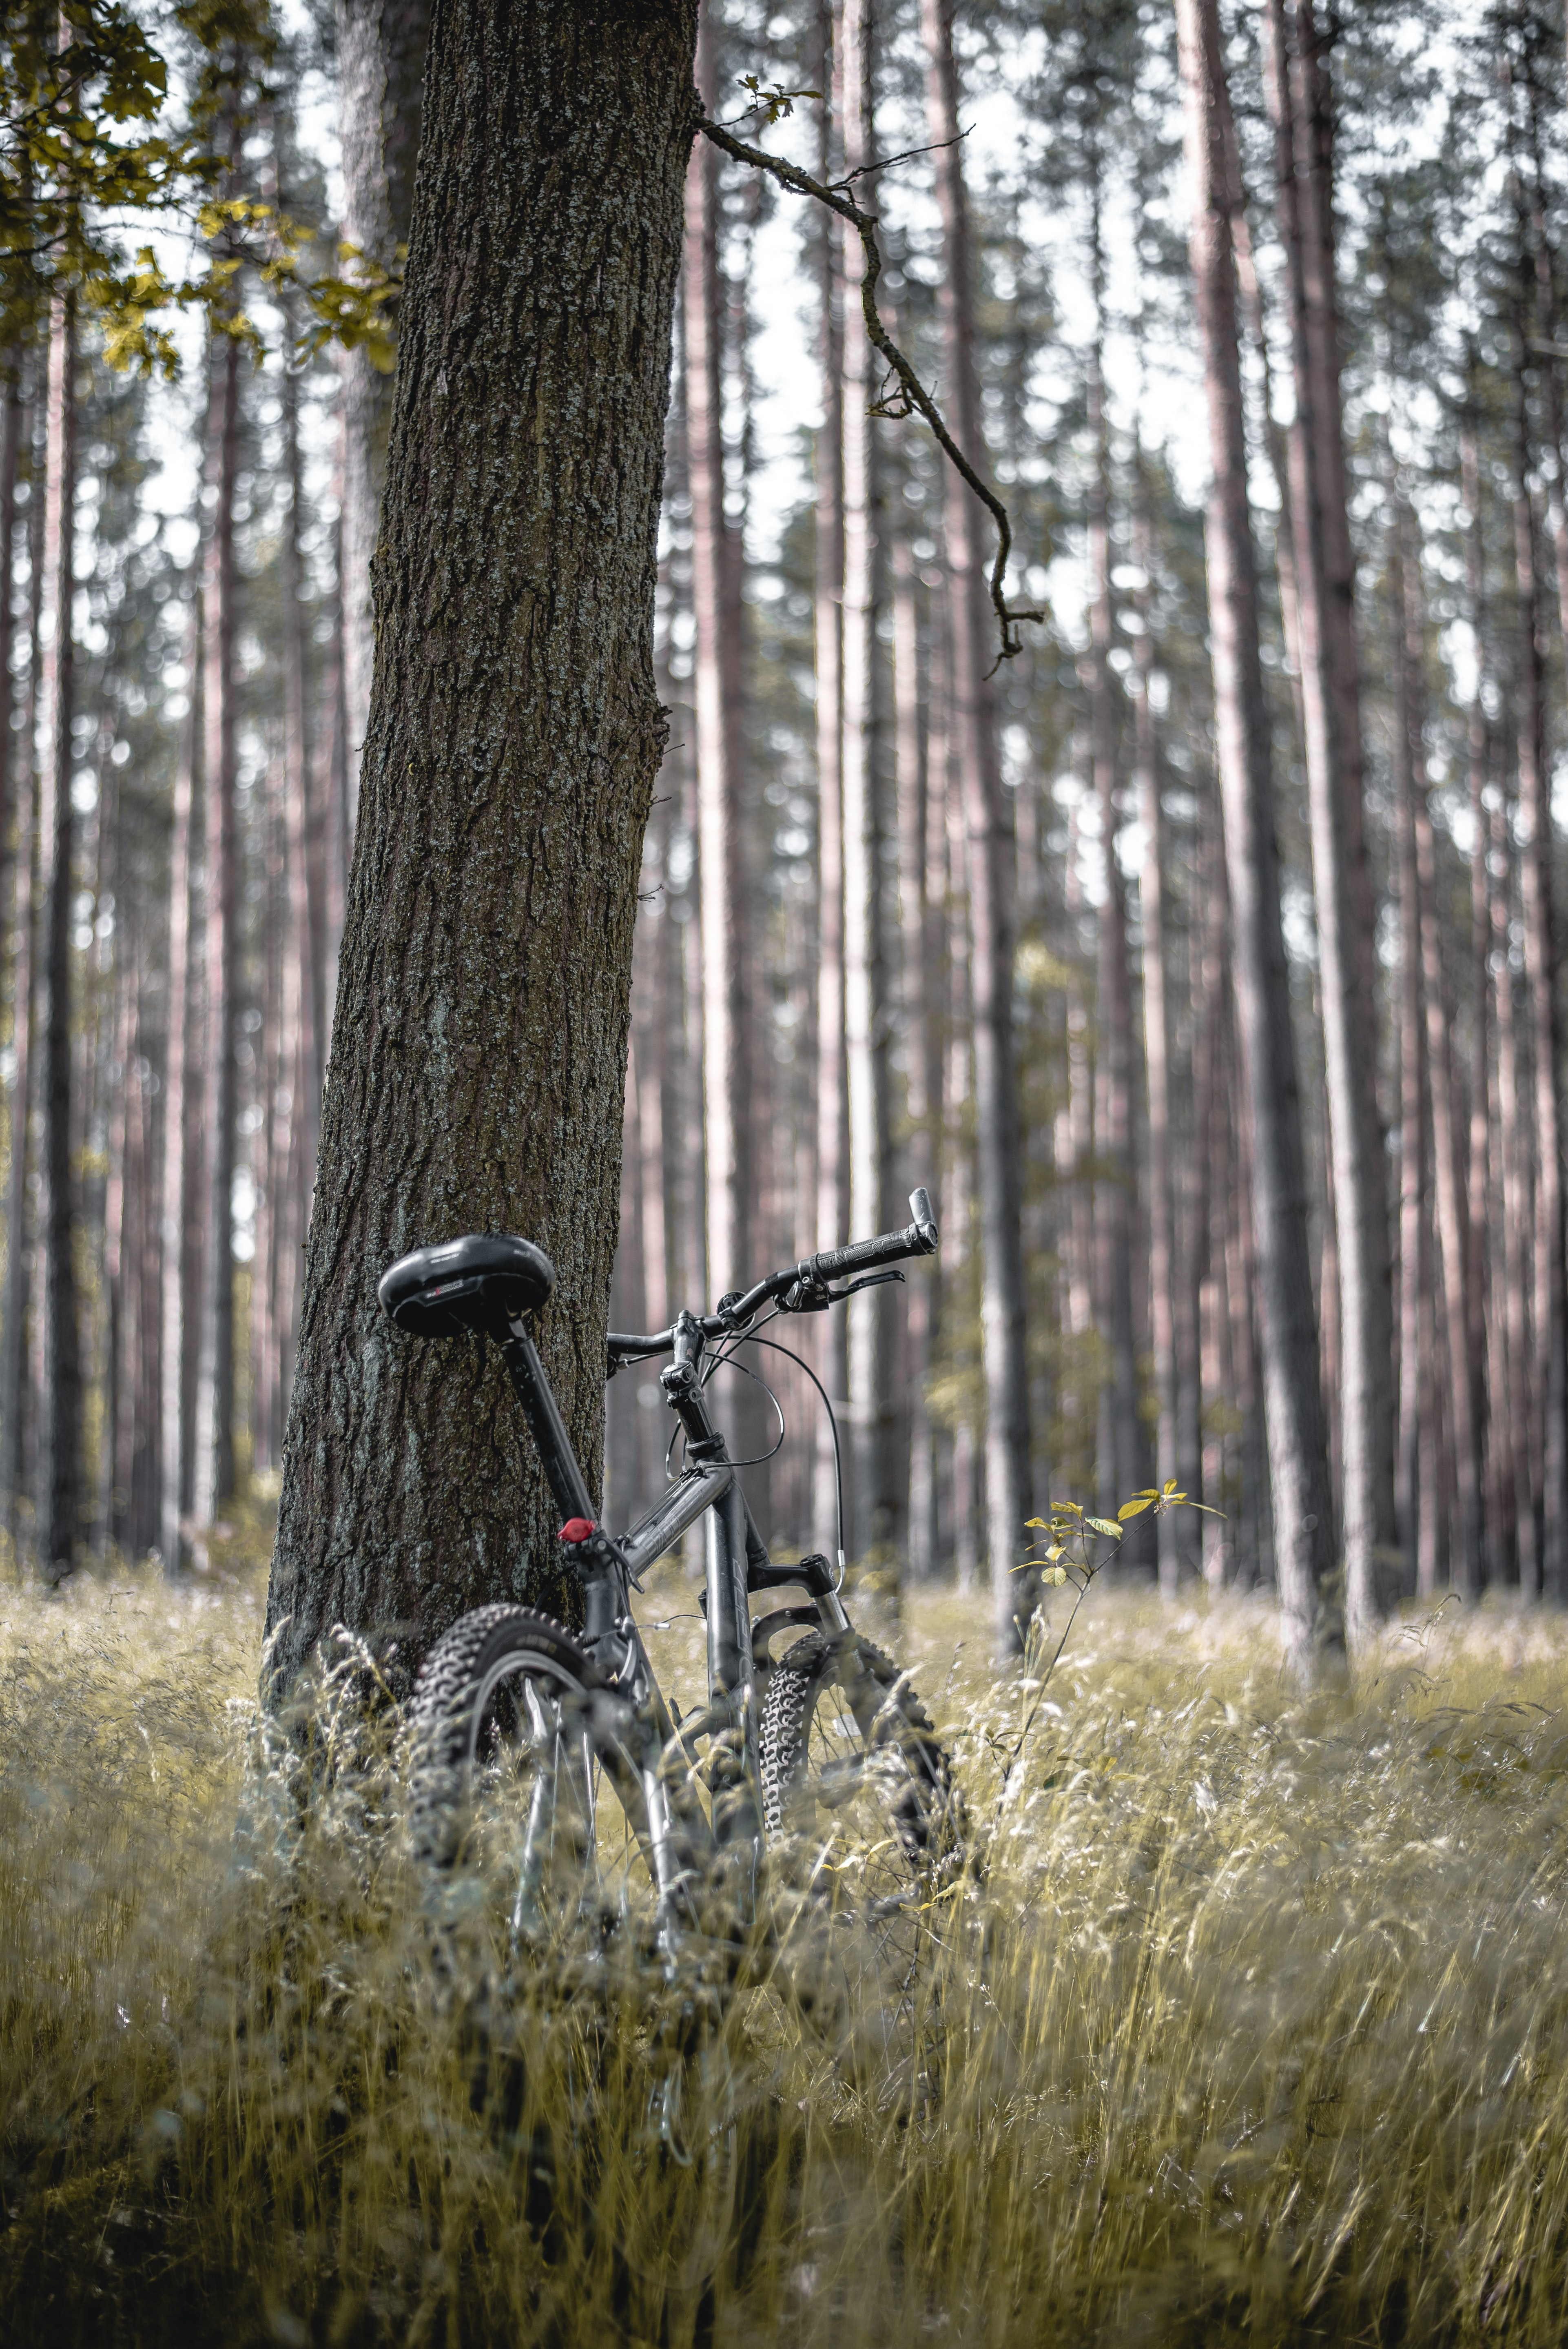 trees, miscellanea, miscellaneous, forest, stroll, bicycle